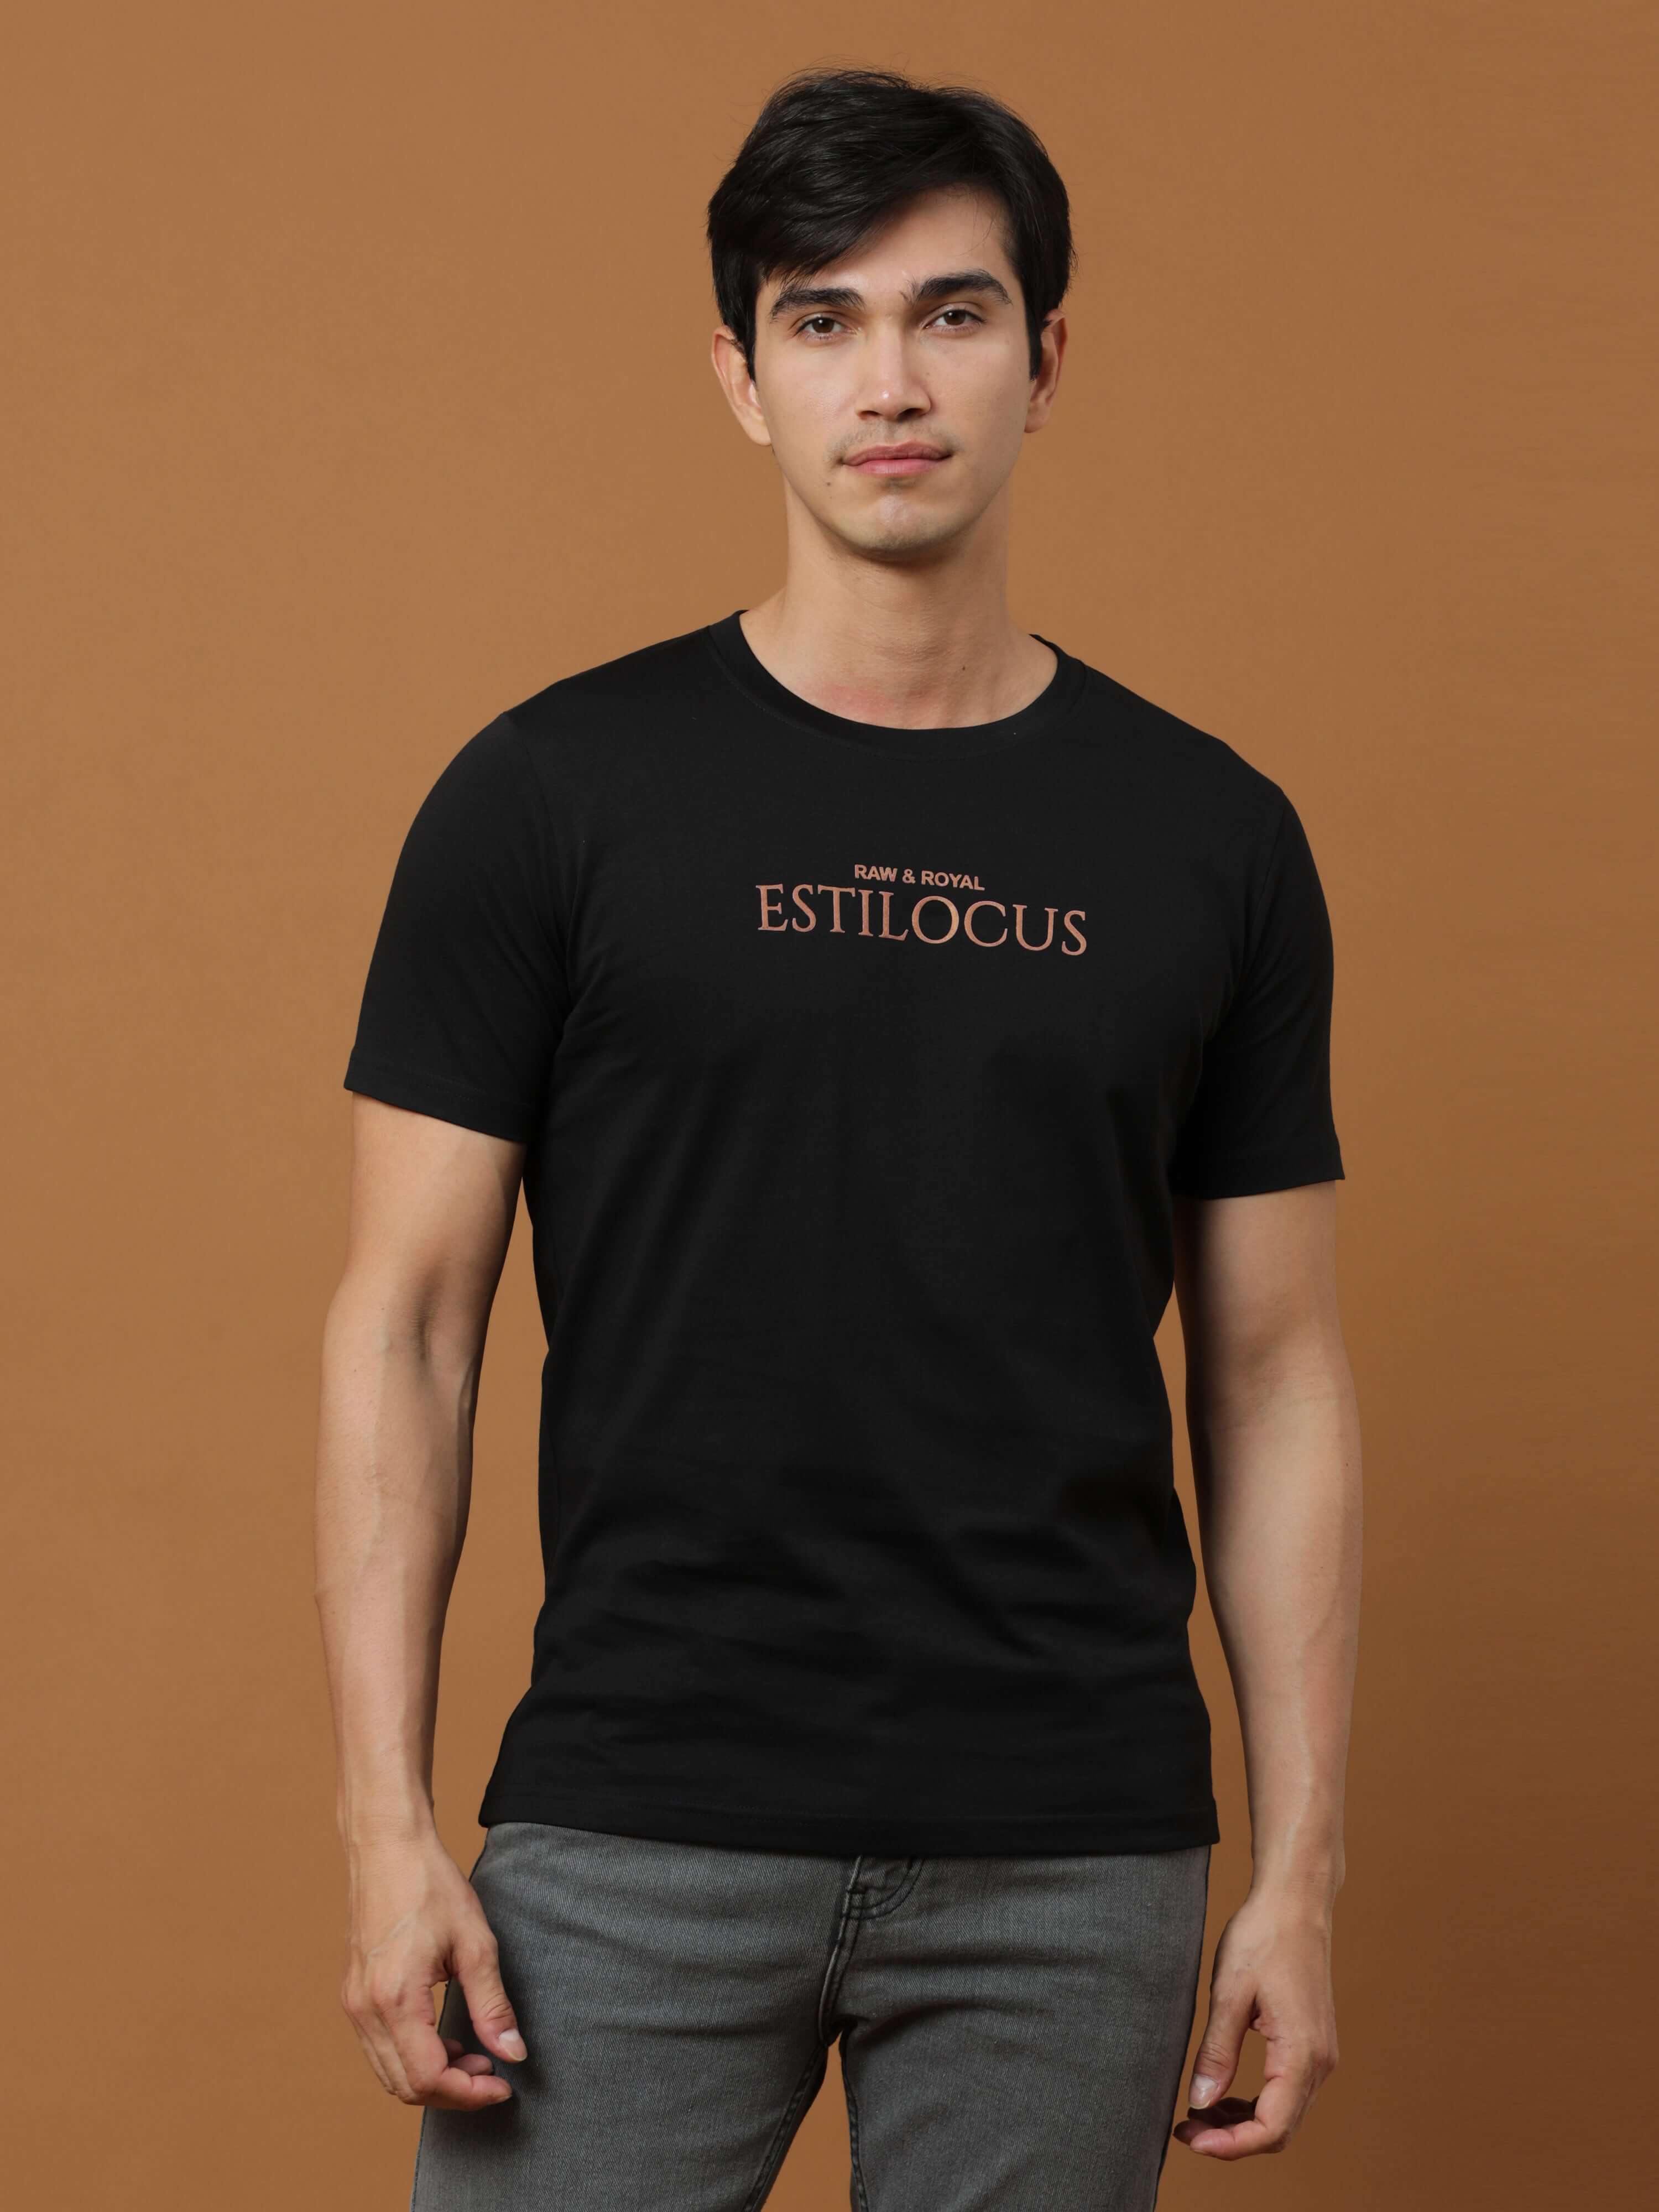 Estilocus Black Printed T Shirt shop online at Estilocus. 100% Cotton Designed and printed on knitted fabric. The fabric is stretchy and lightweight, with a soft skin feel and no wrinkles. Crew neck collar which is smooth on the neck and keeps you comfort